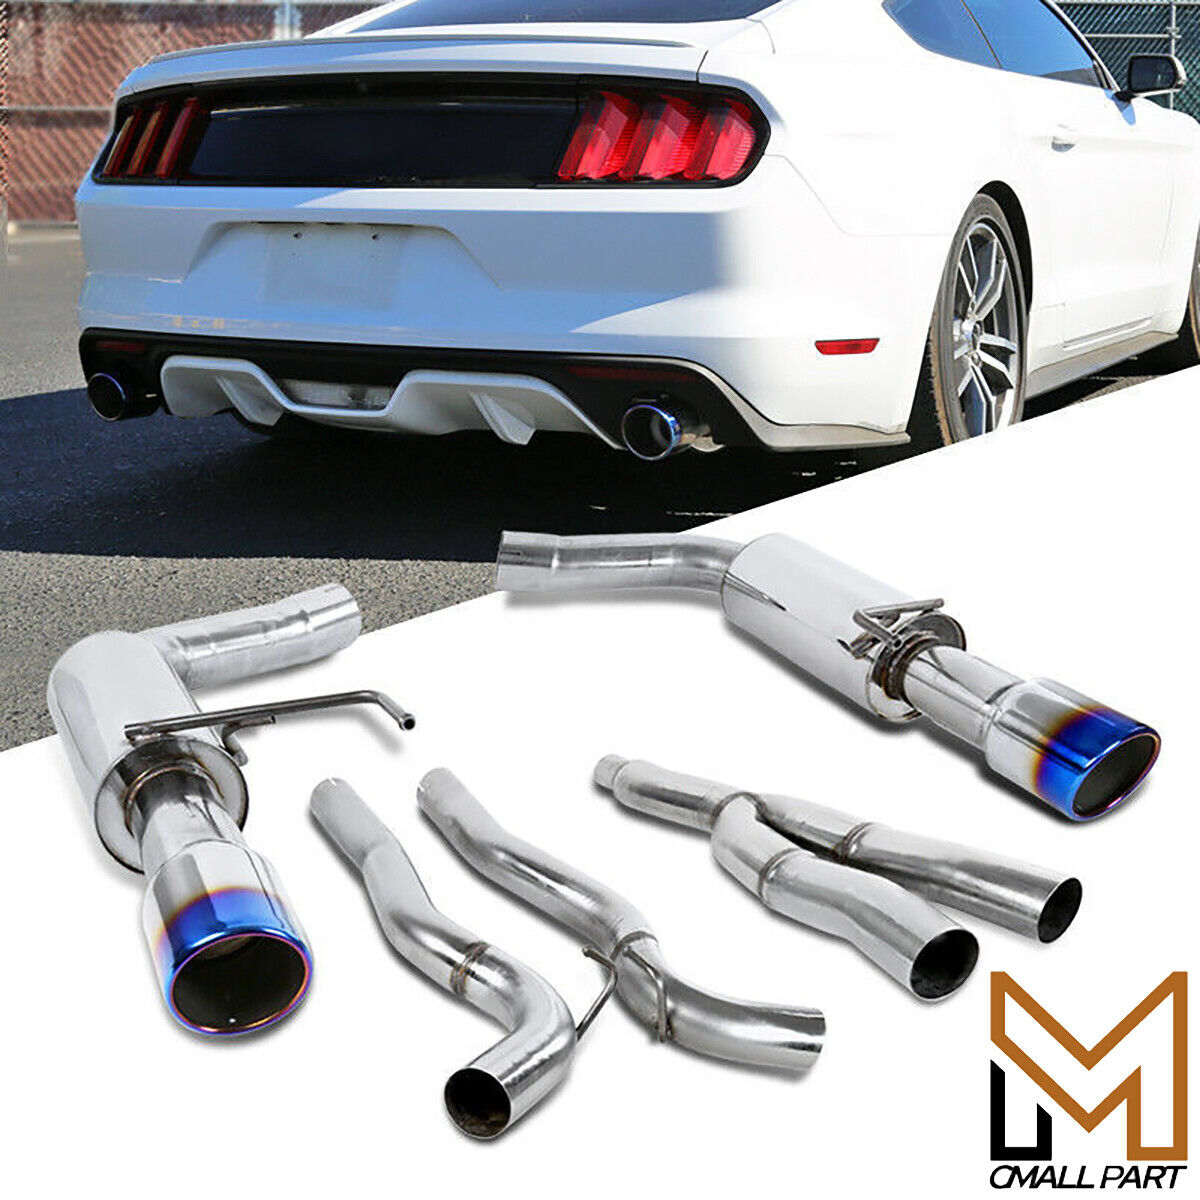 NEW Catback Exhaust Fits 2015-2021 Ford Mustang 2.3L EcoBoost Burnt Tip Kit US